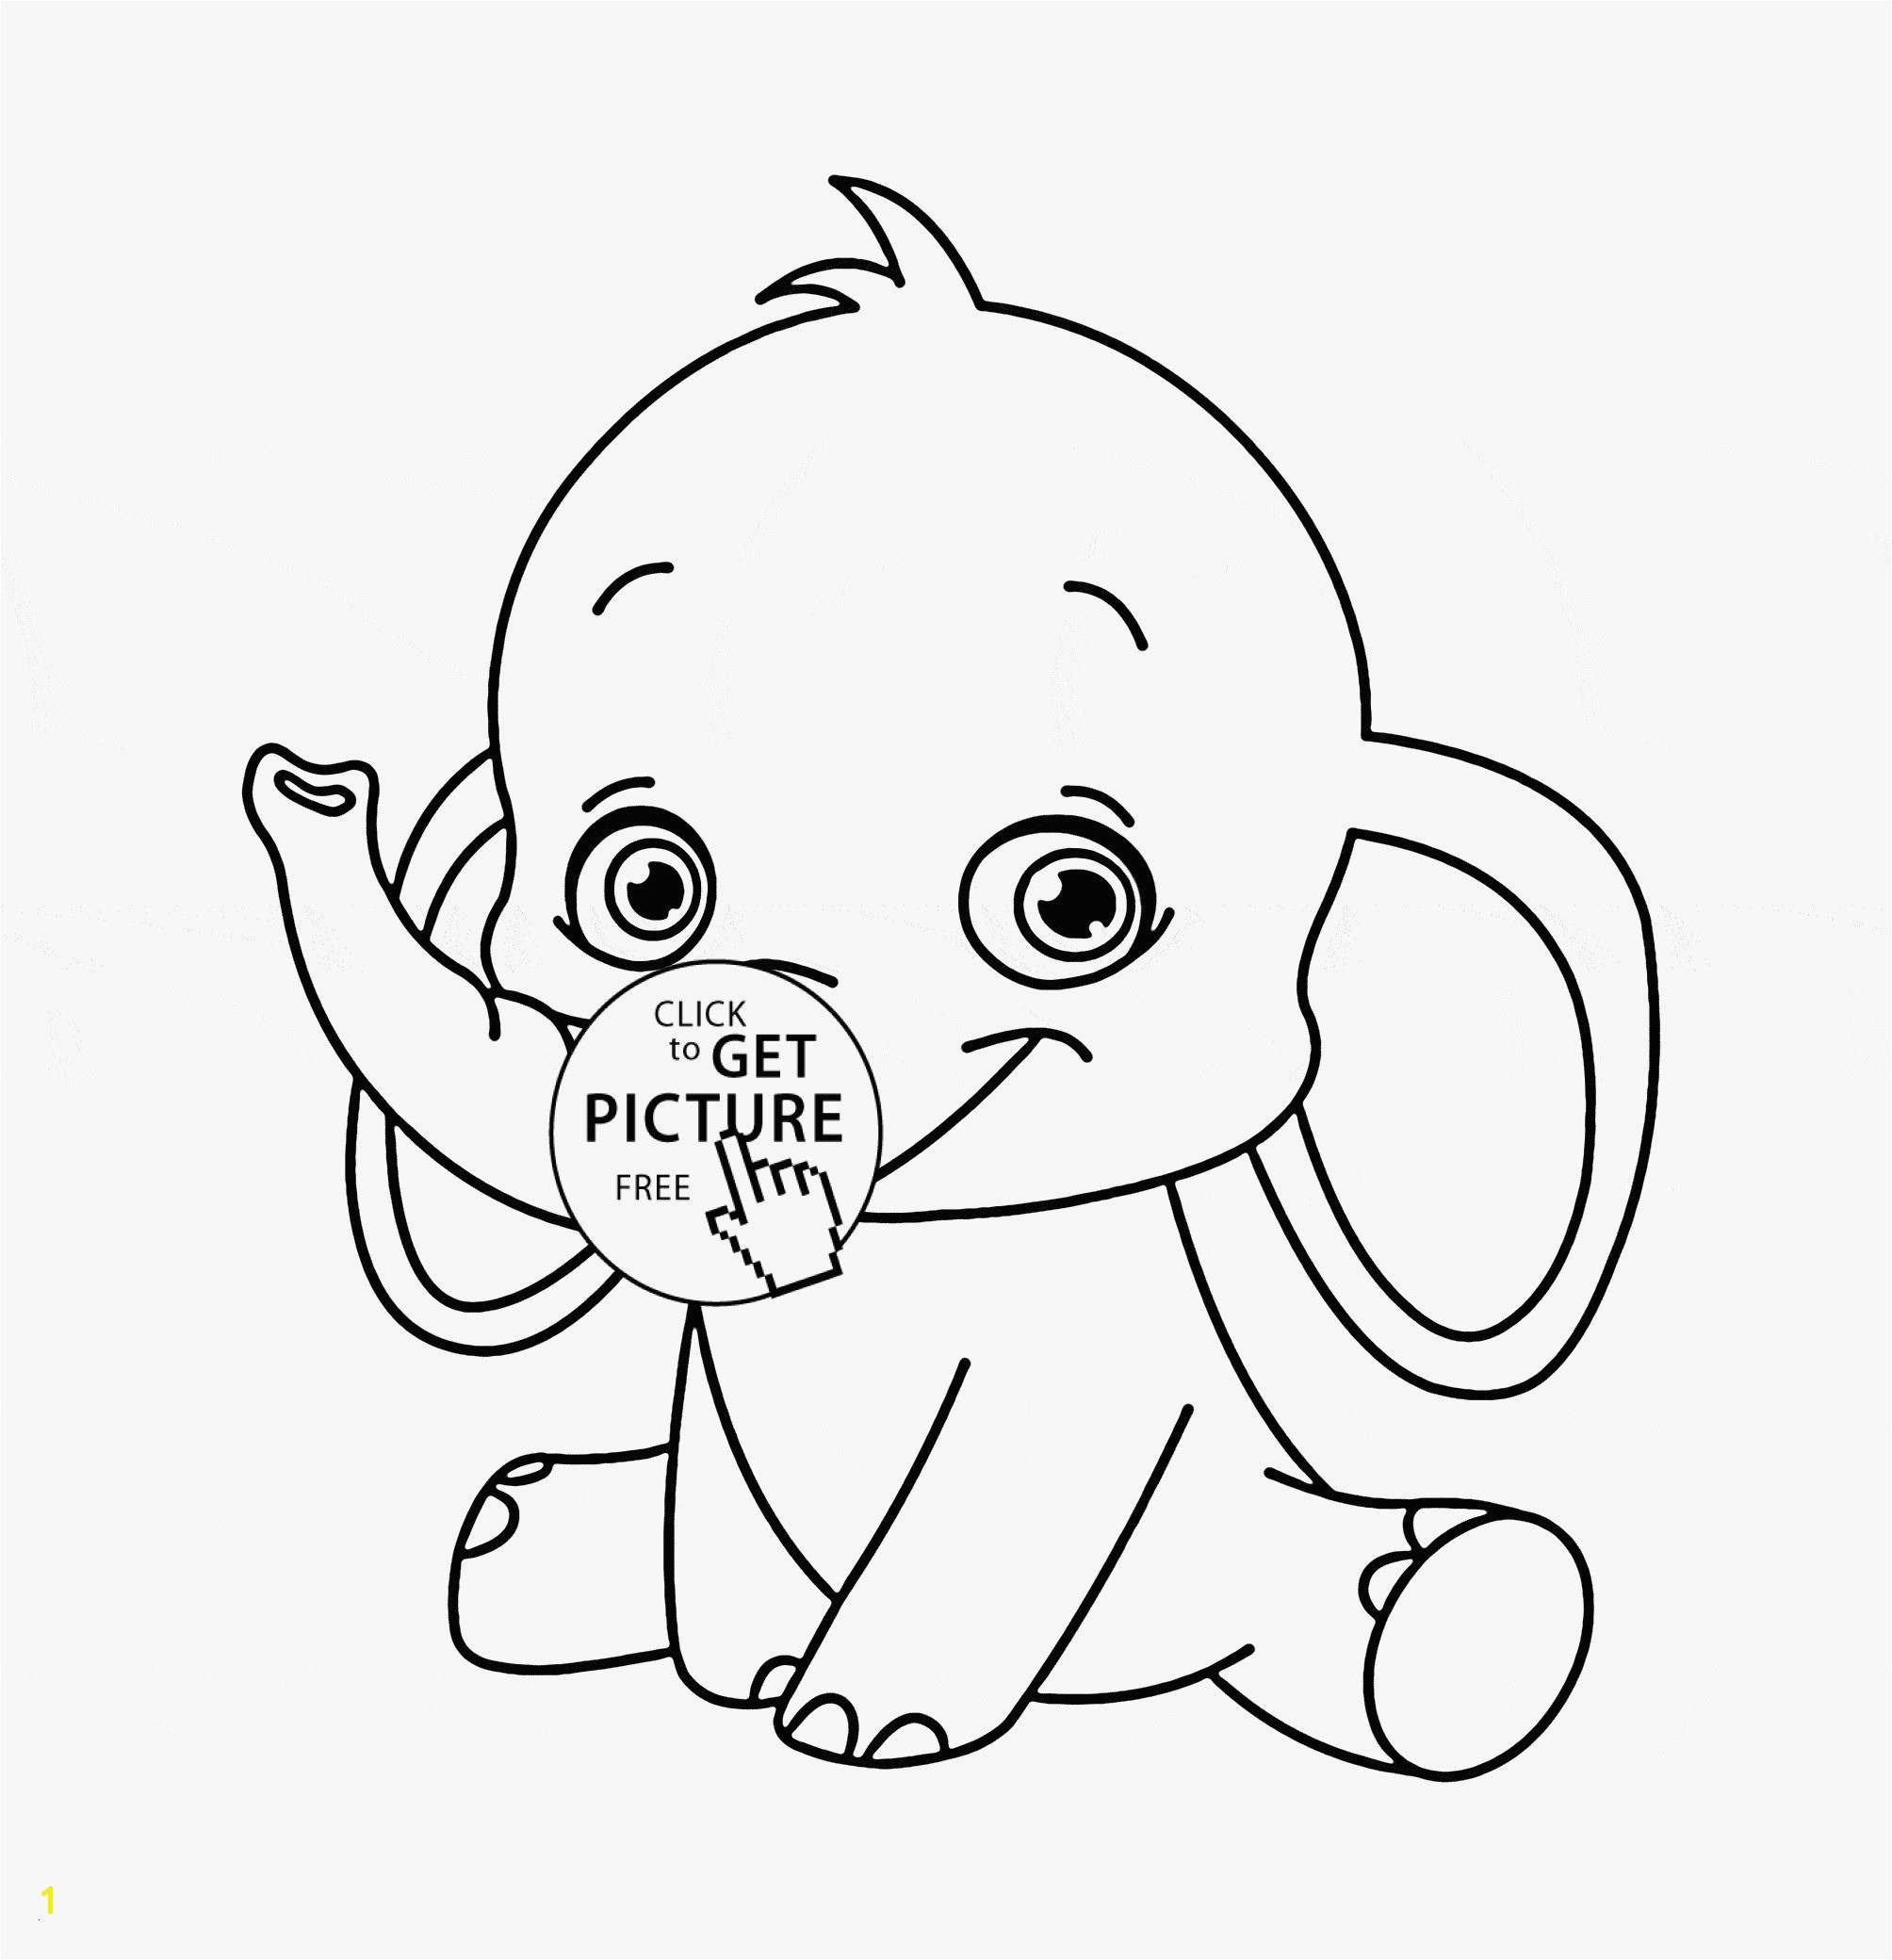 Adorable Baby Animal Coloring Pages 12 Unique Baby Animal Coloring Pages